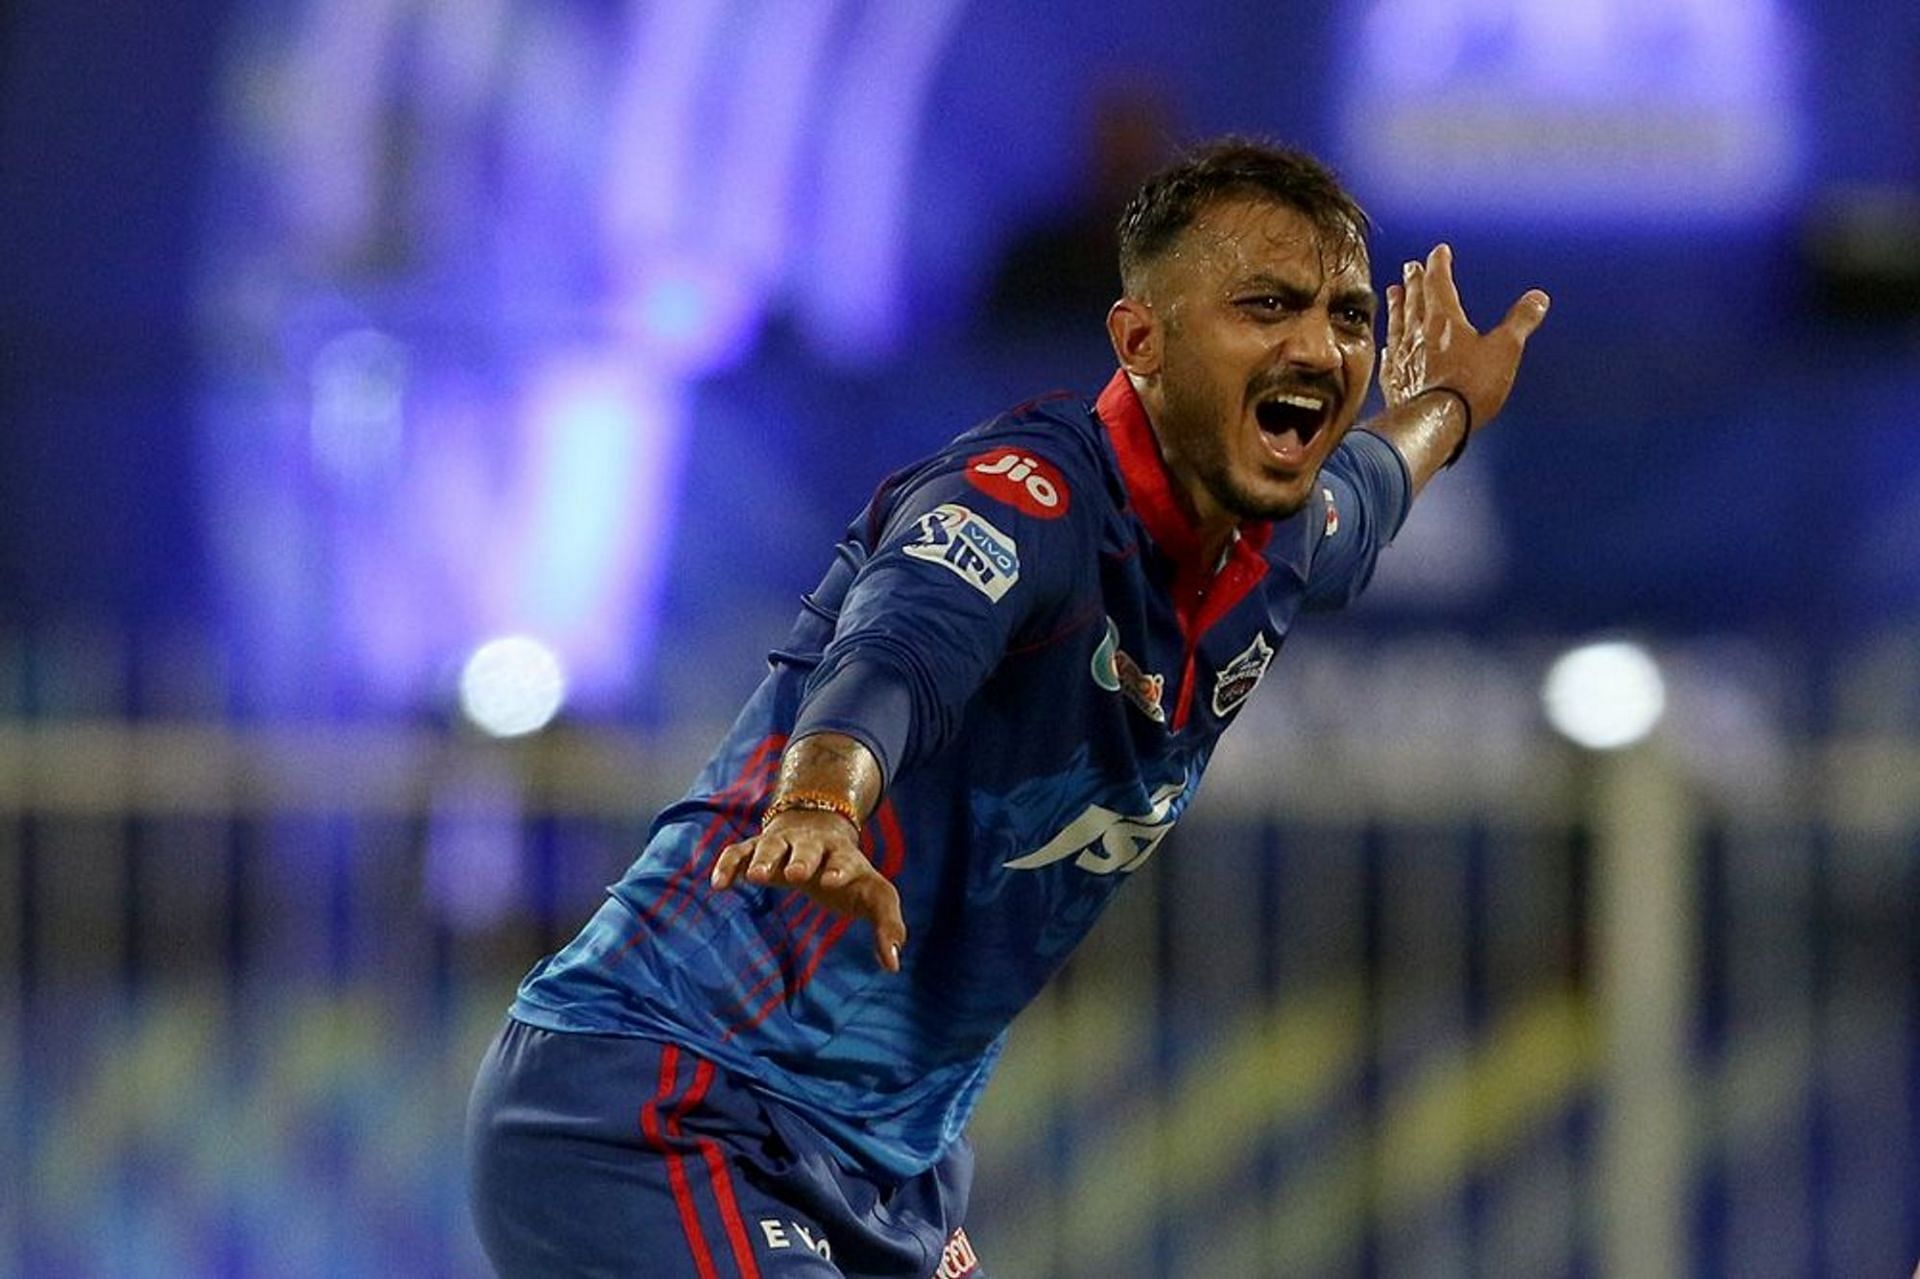 Axar Patel was named in the Indian T20 World Cup 2021 squad (Image Courtesy: IPLT20.com)